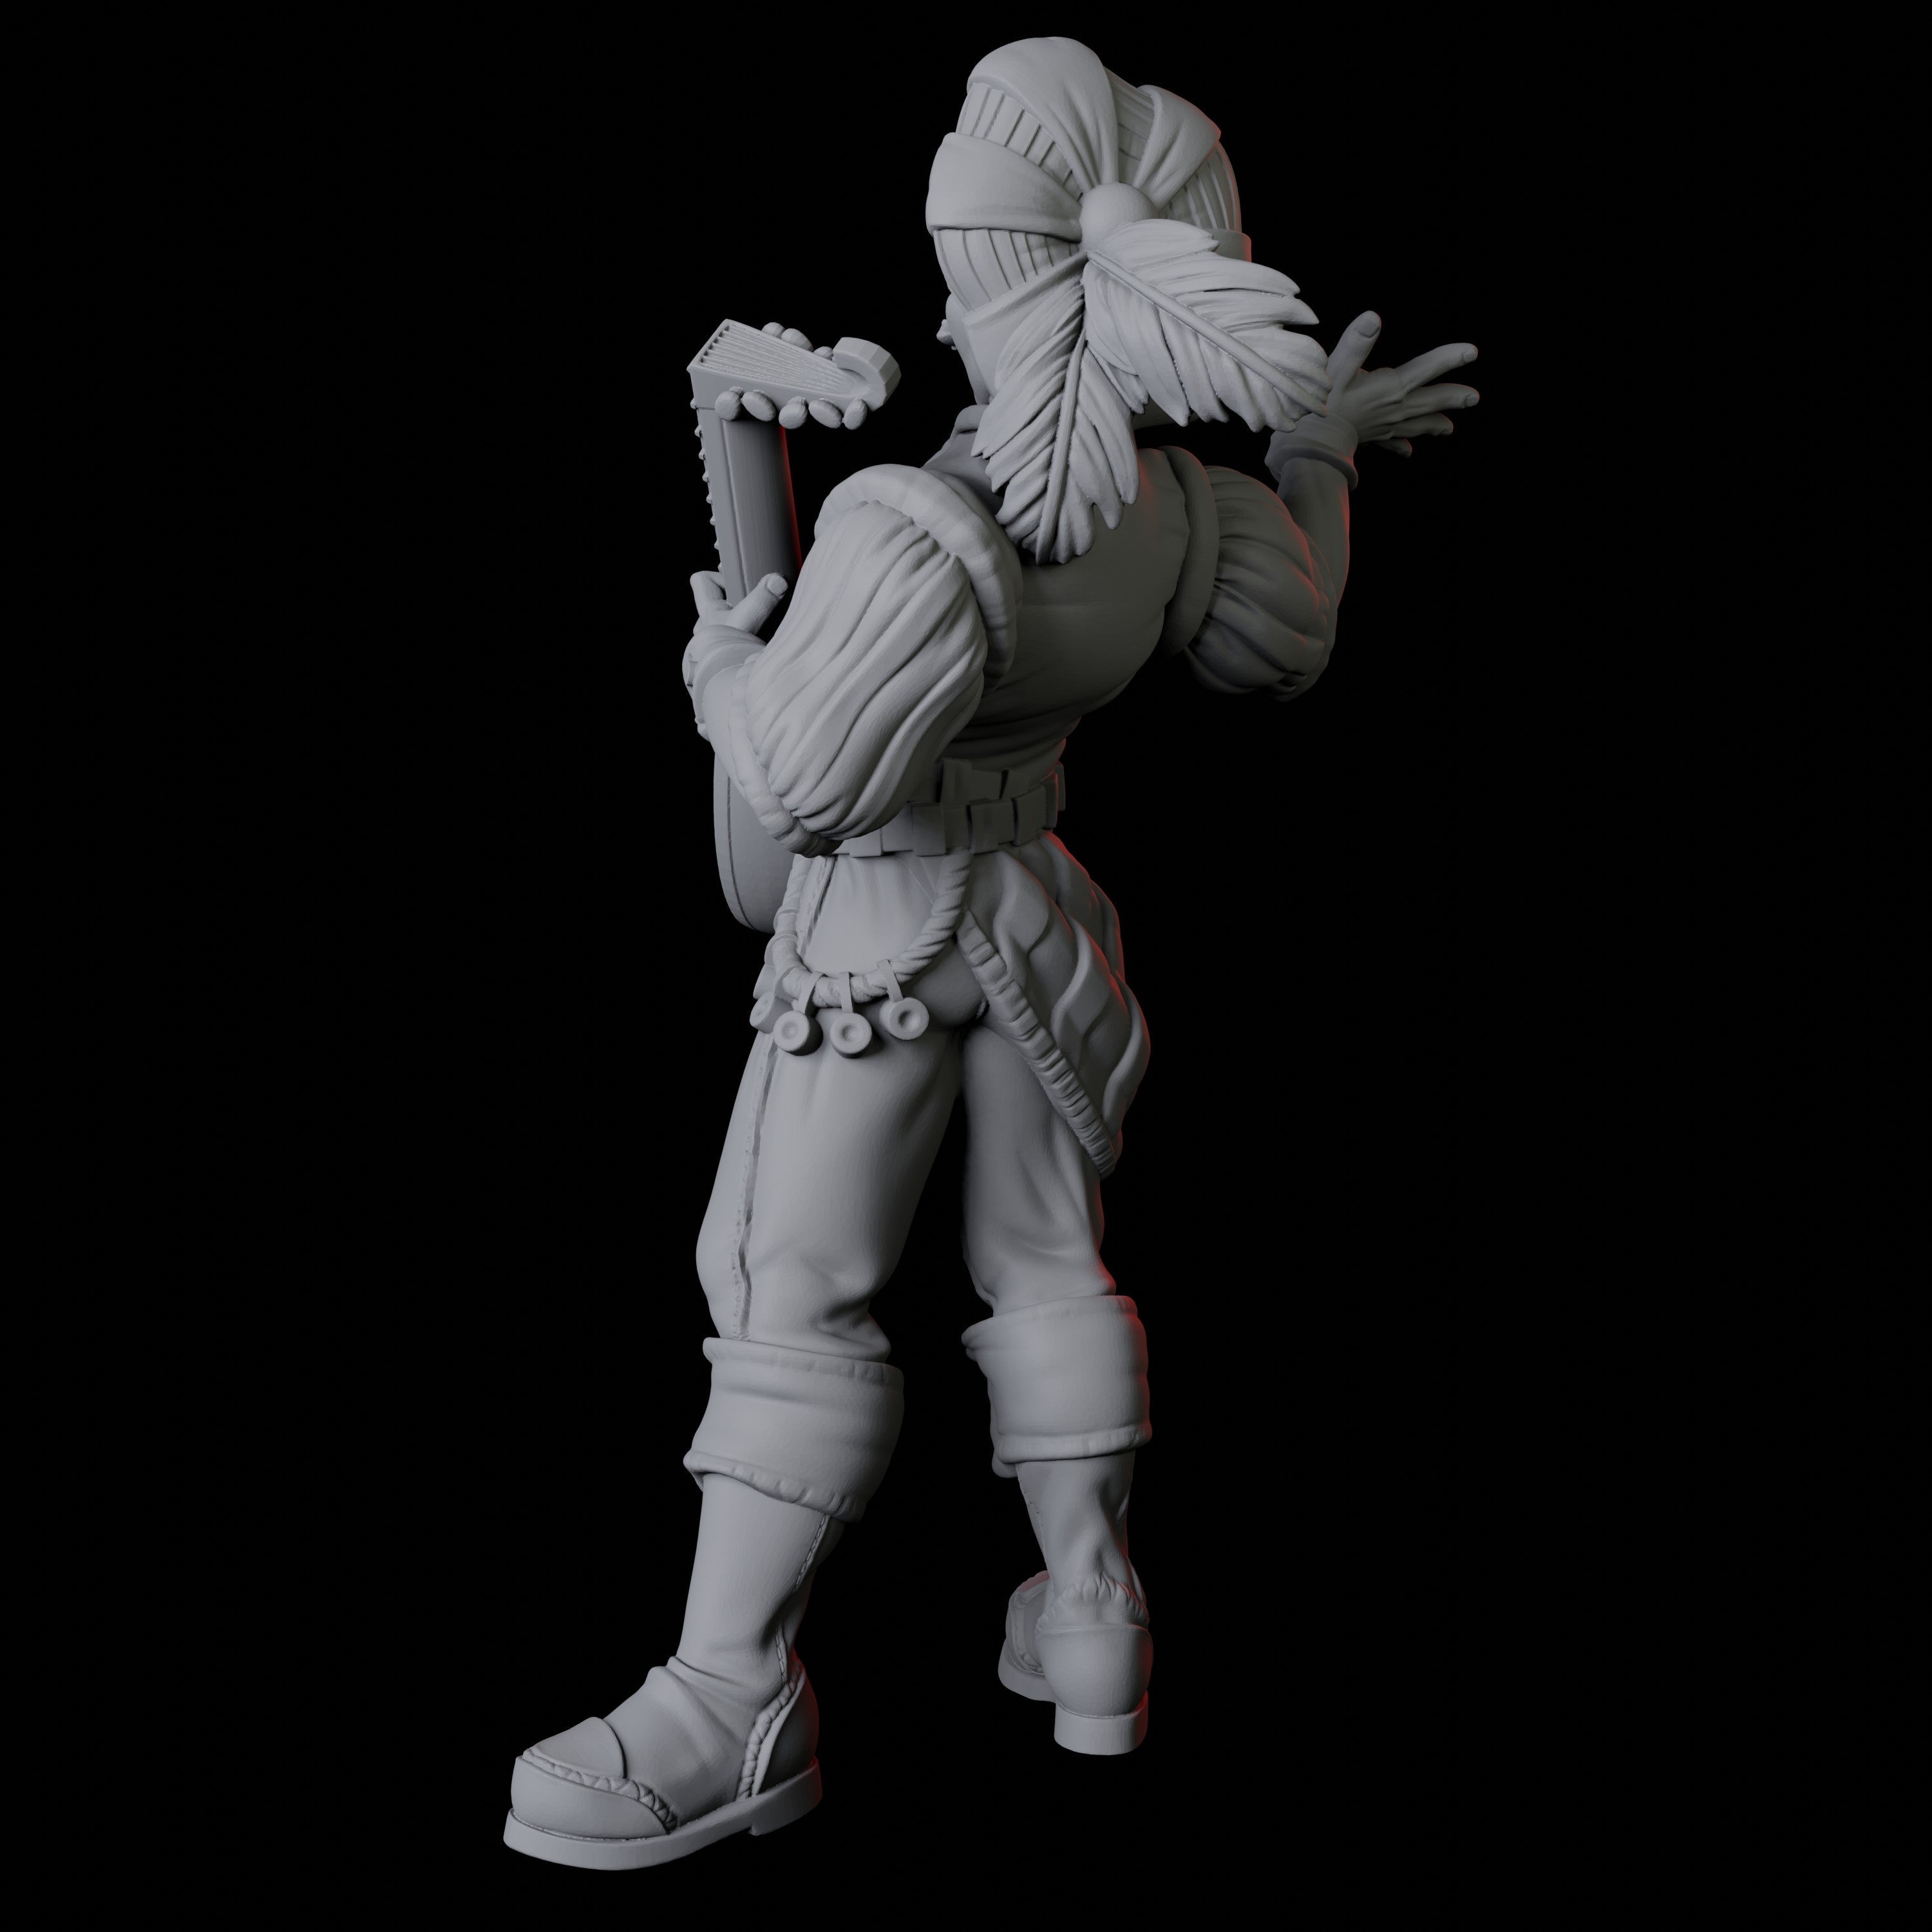 Lute Bard Miniature for Dungeons and Dragons